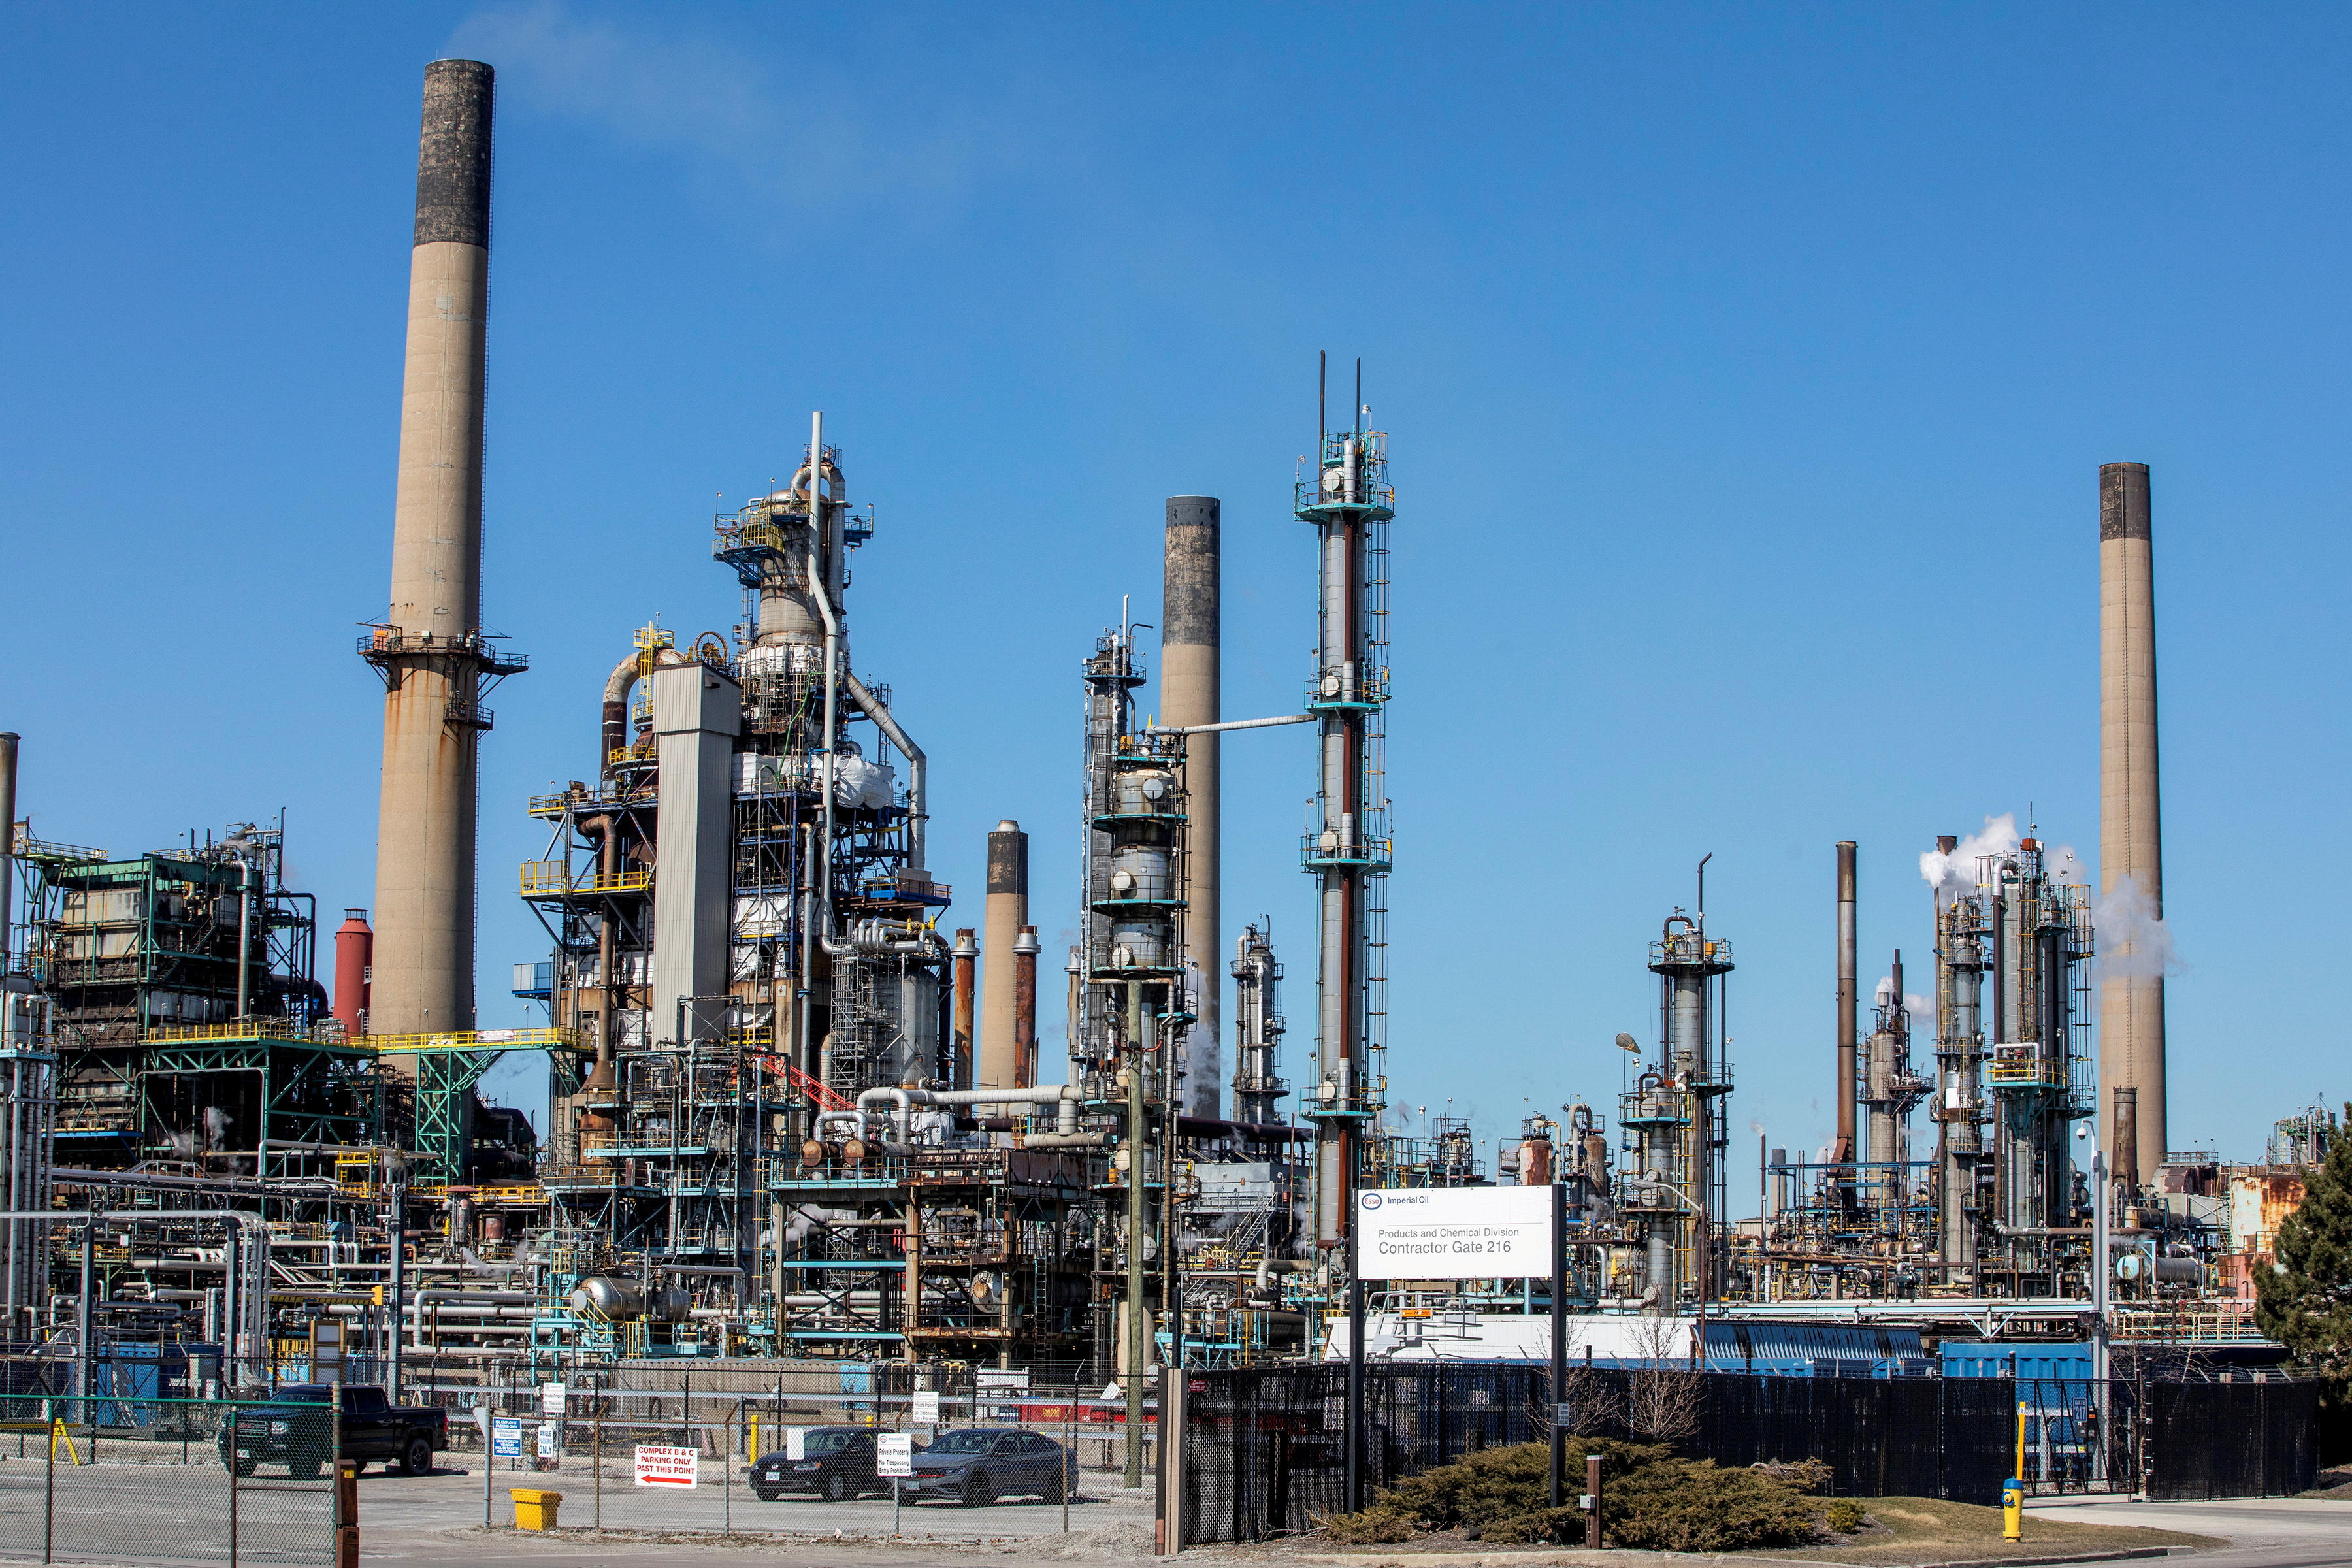 General view of the Imperial Oil refinery, located near Enbridge's Line 5 pipeline in Sarnia, Ontario, Canada March 20, 2021.  REUTERS/Carlos Osorio/File Photo